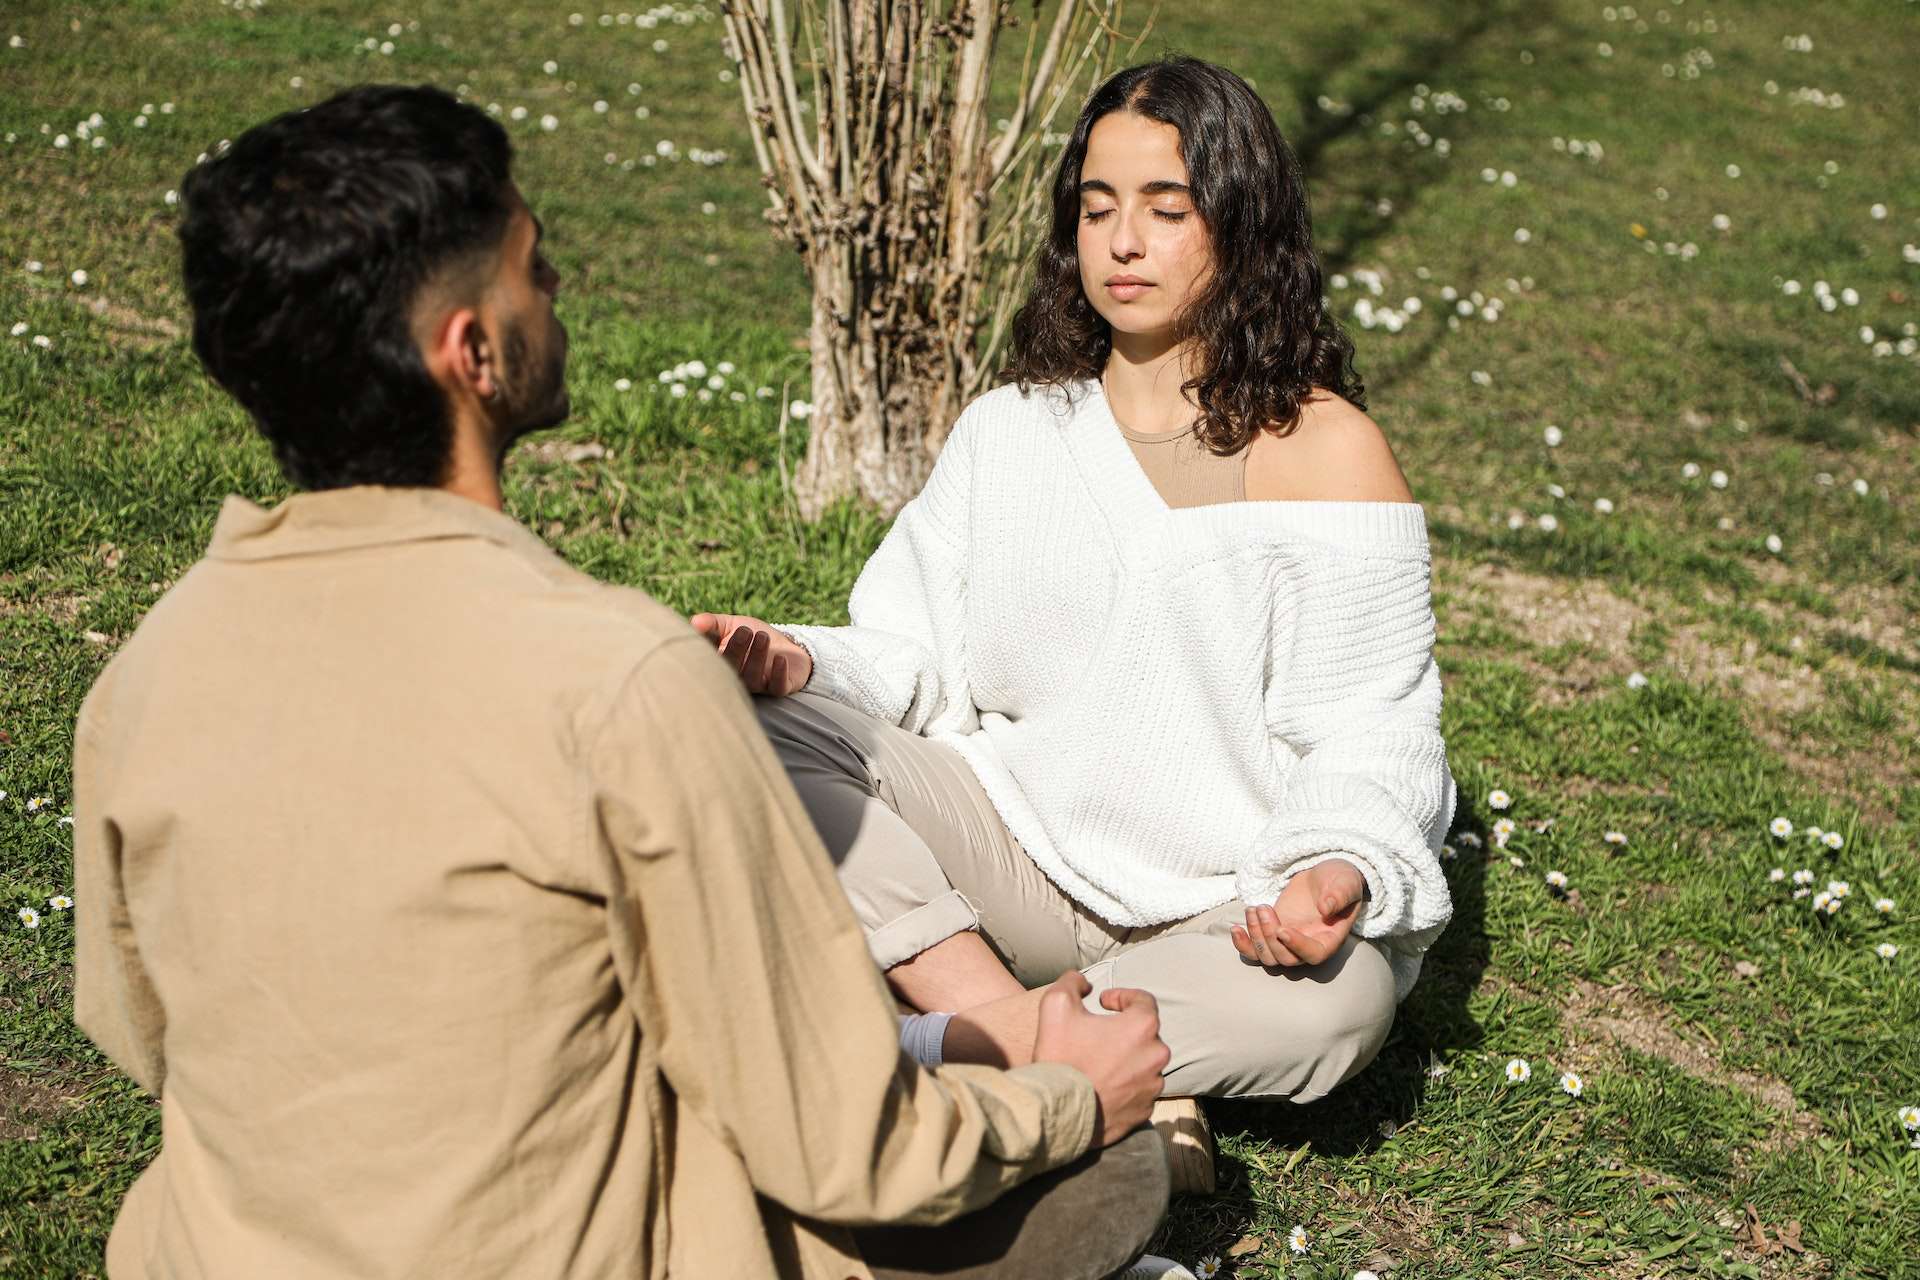 A Couple Meditating while Sitting on a Grassy Ground 